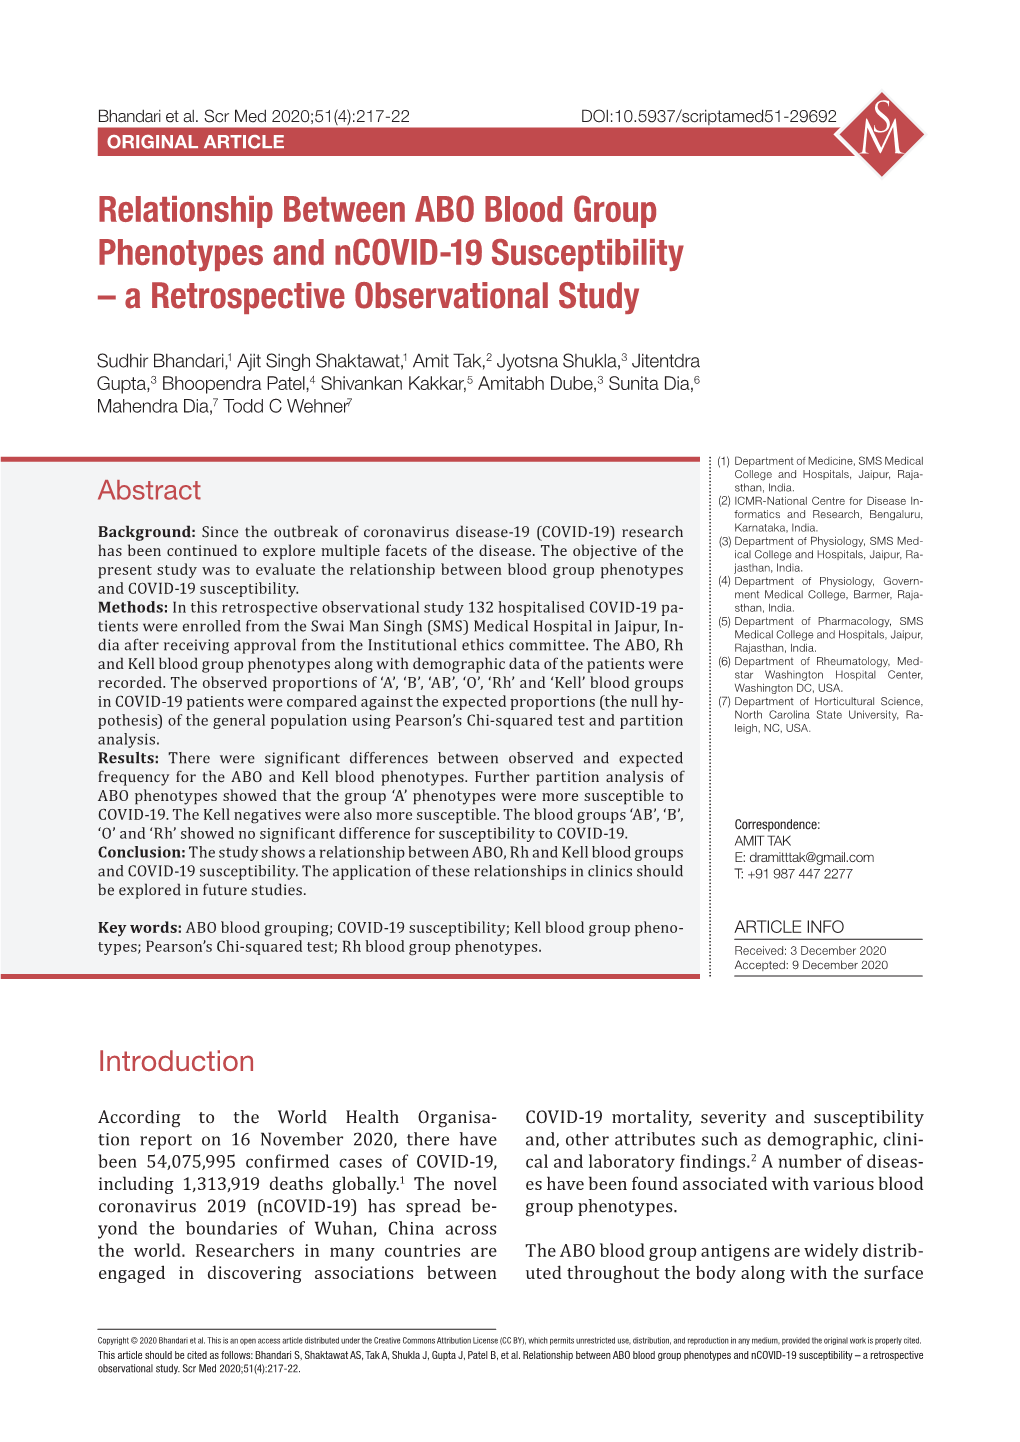 Relationship Between ABO Blood Group Phenotypes and Ncovid-19 Susceptibility – a Retrospective Observational Study